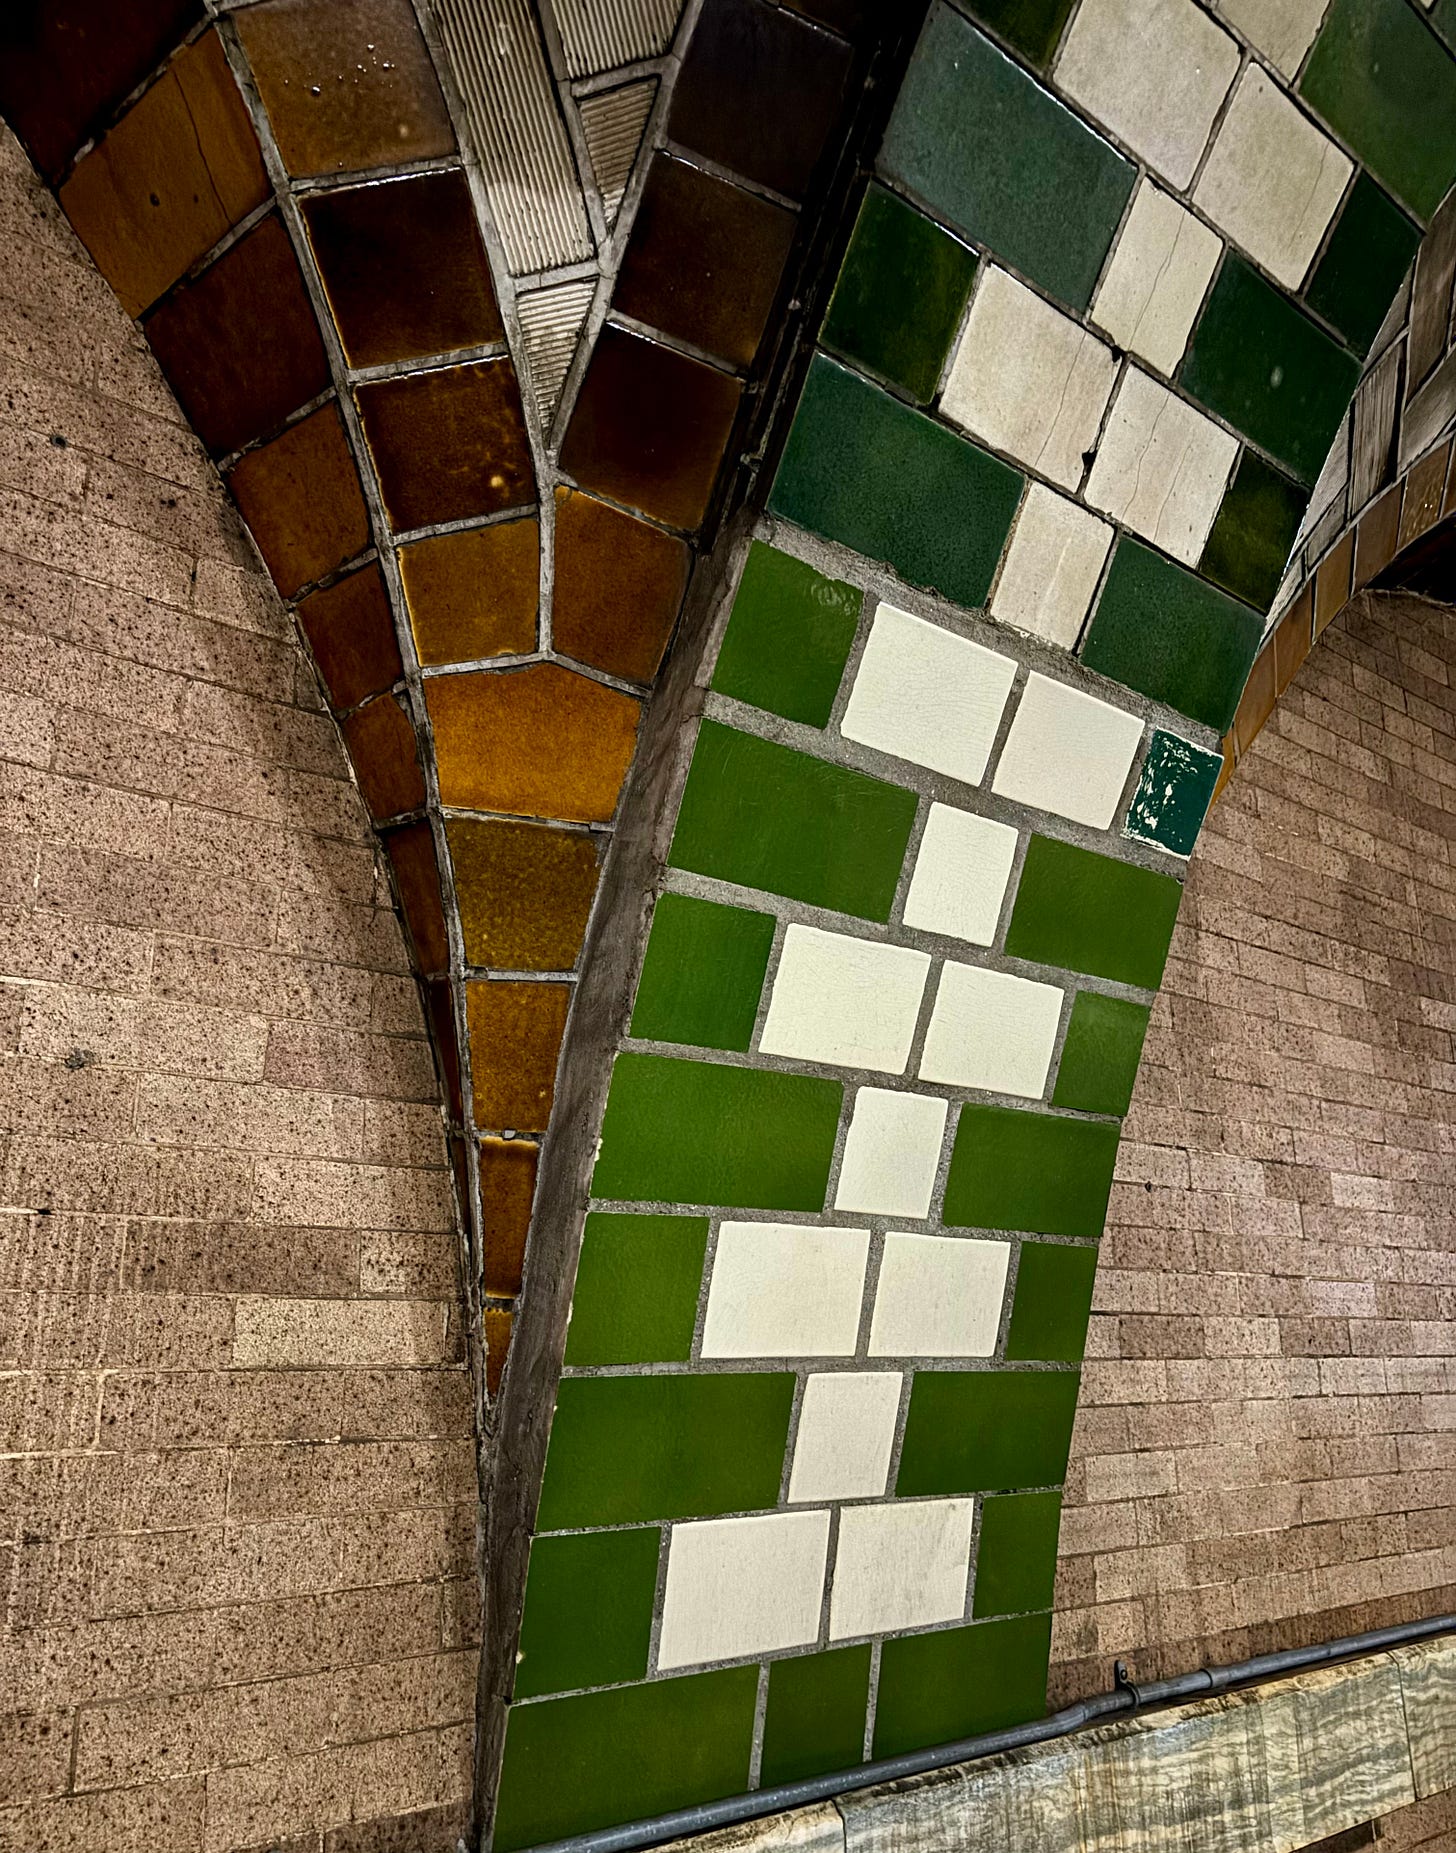 Green and amber tiles meet at the bottom corner of the vaulted arch.